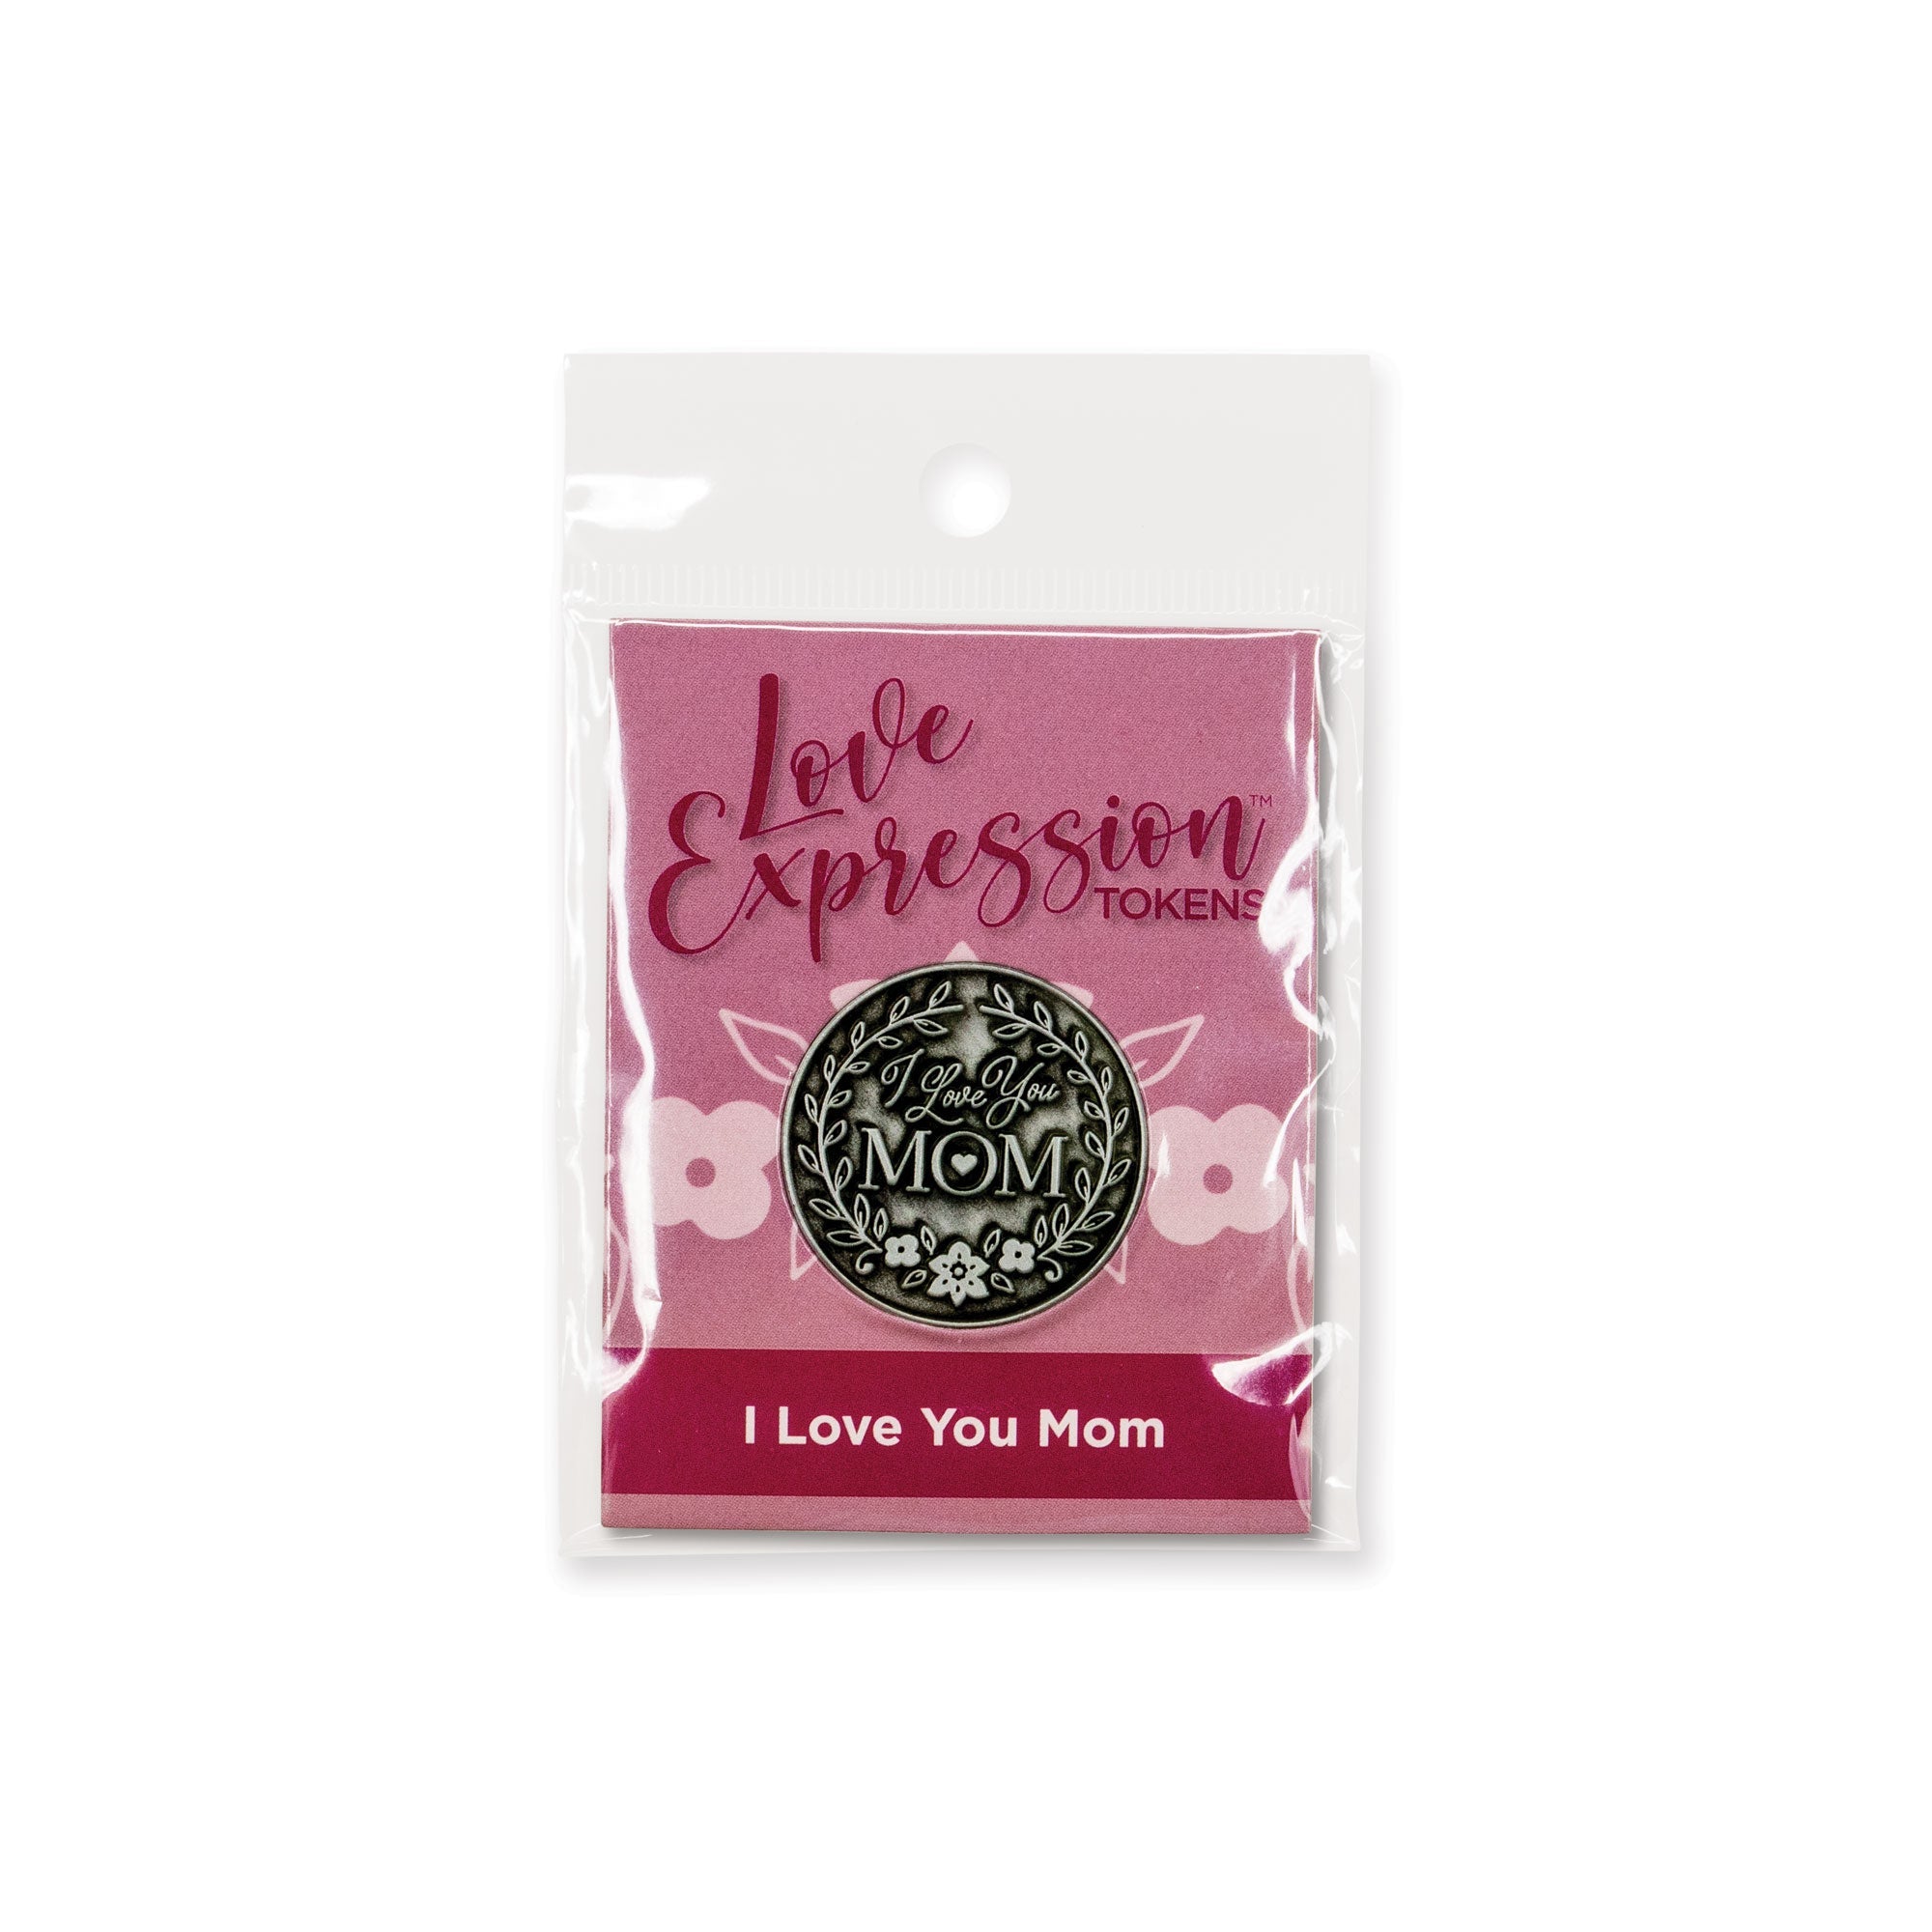 I Love You Mom, Family Love Expression Coin